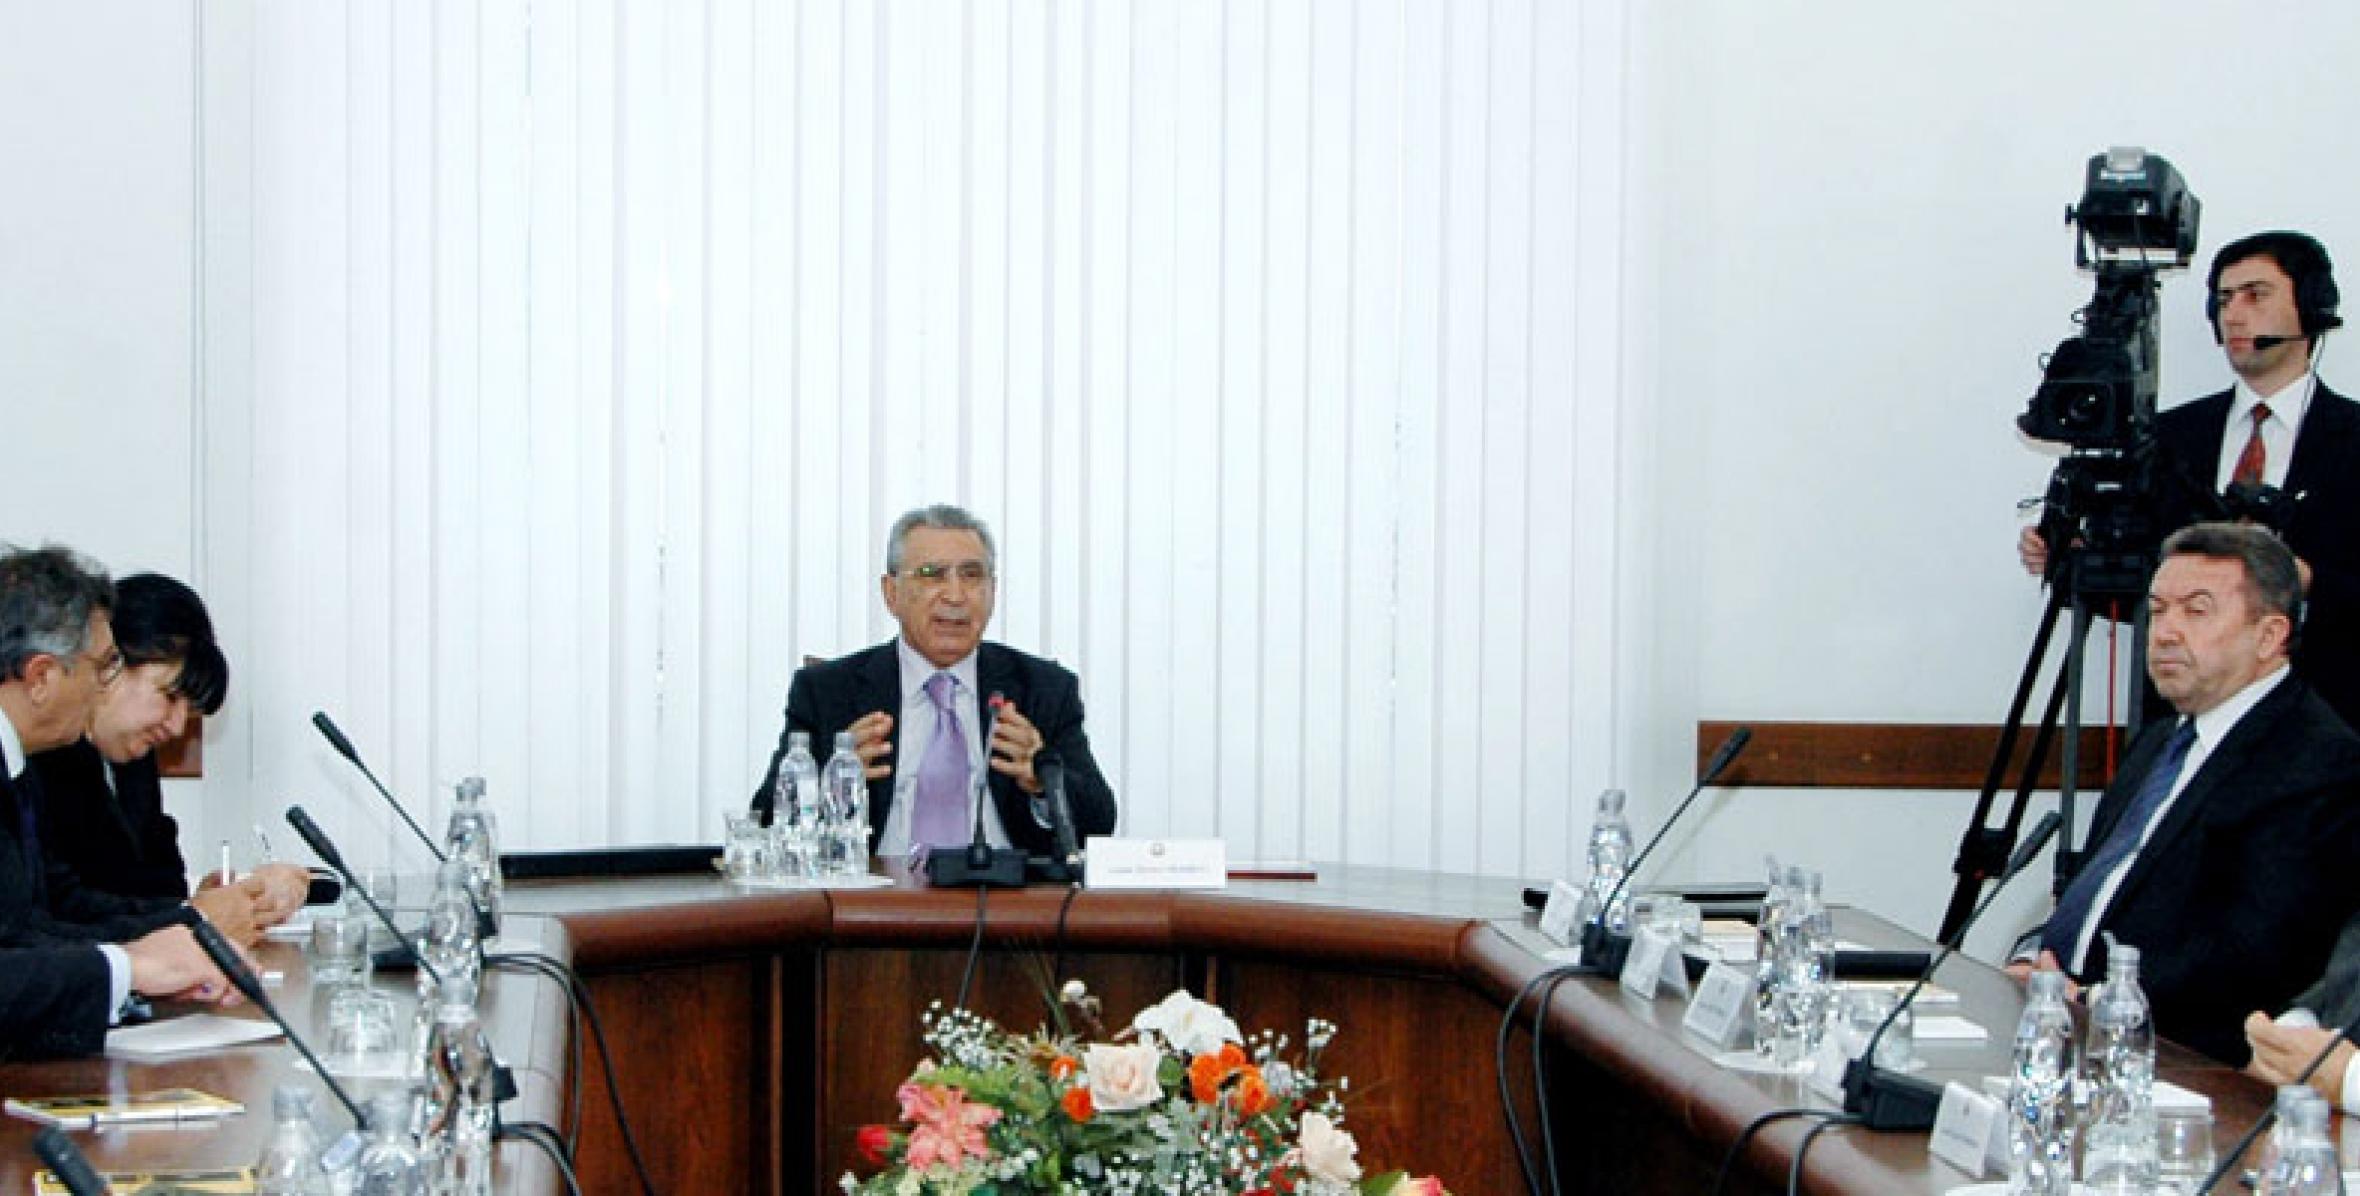 A meeting was held about new financing mechanisms of higher education institutions